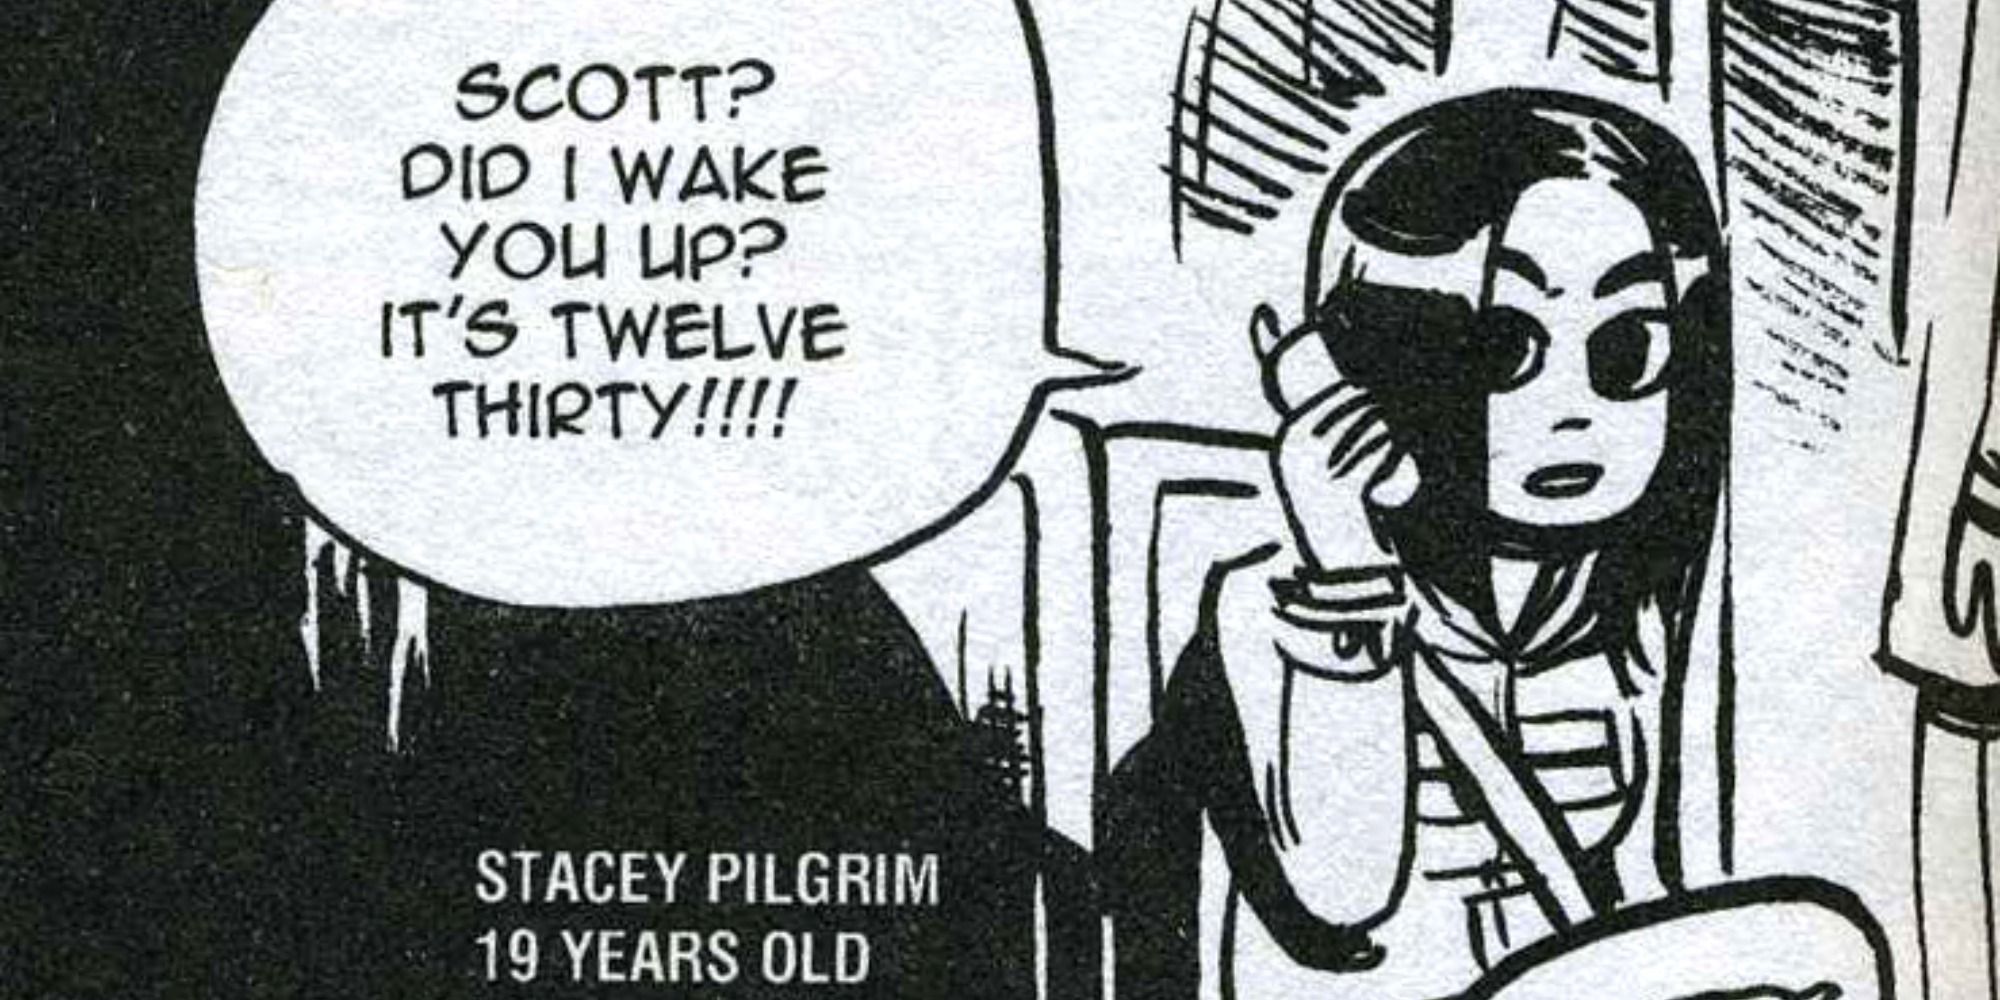 Stacey Pilgrim criticizes her older brother Scott for waking up so late in Brian Lee O'Malley's Scott Pilgrim